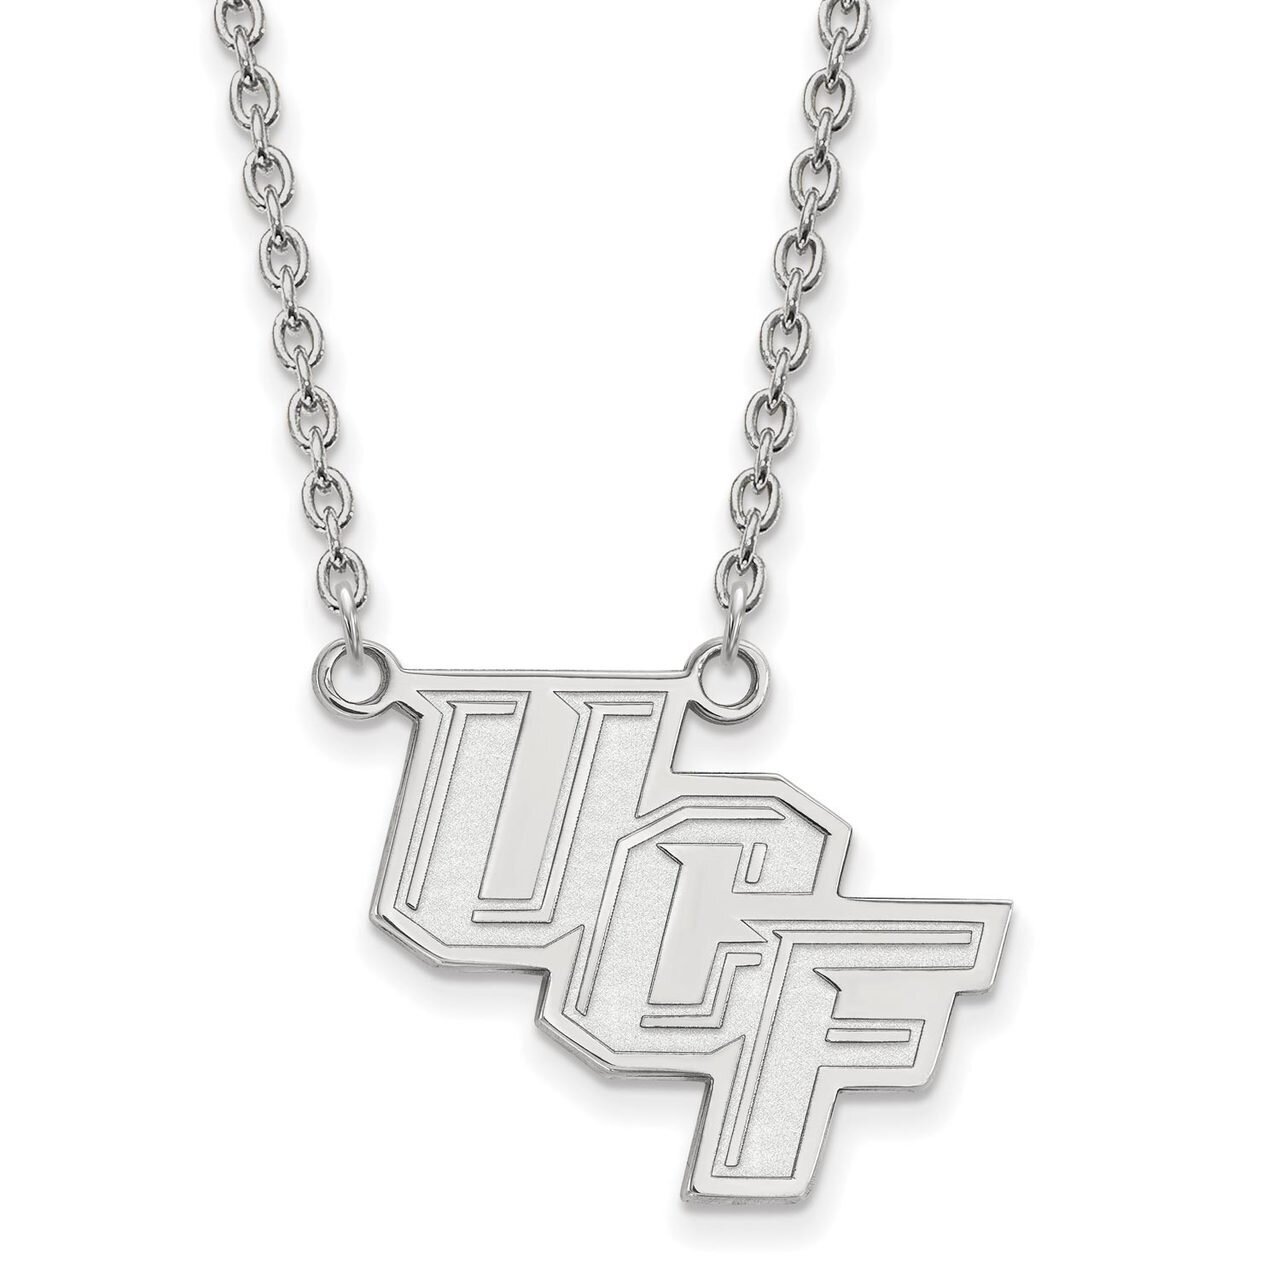 University of Central Florida Large Pendant with Chain Necklace 10k White Gold 1W012UCF-18